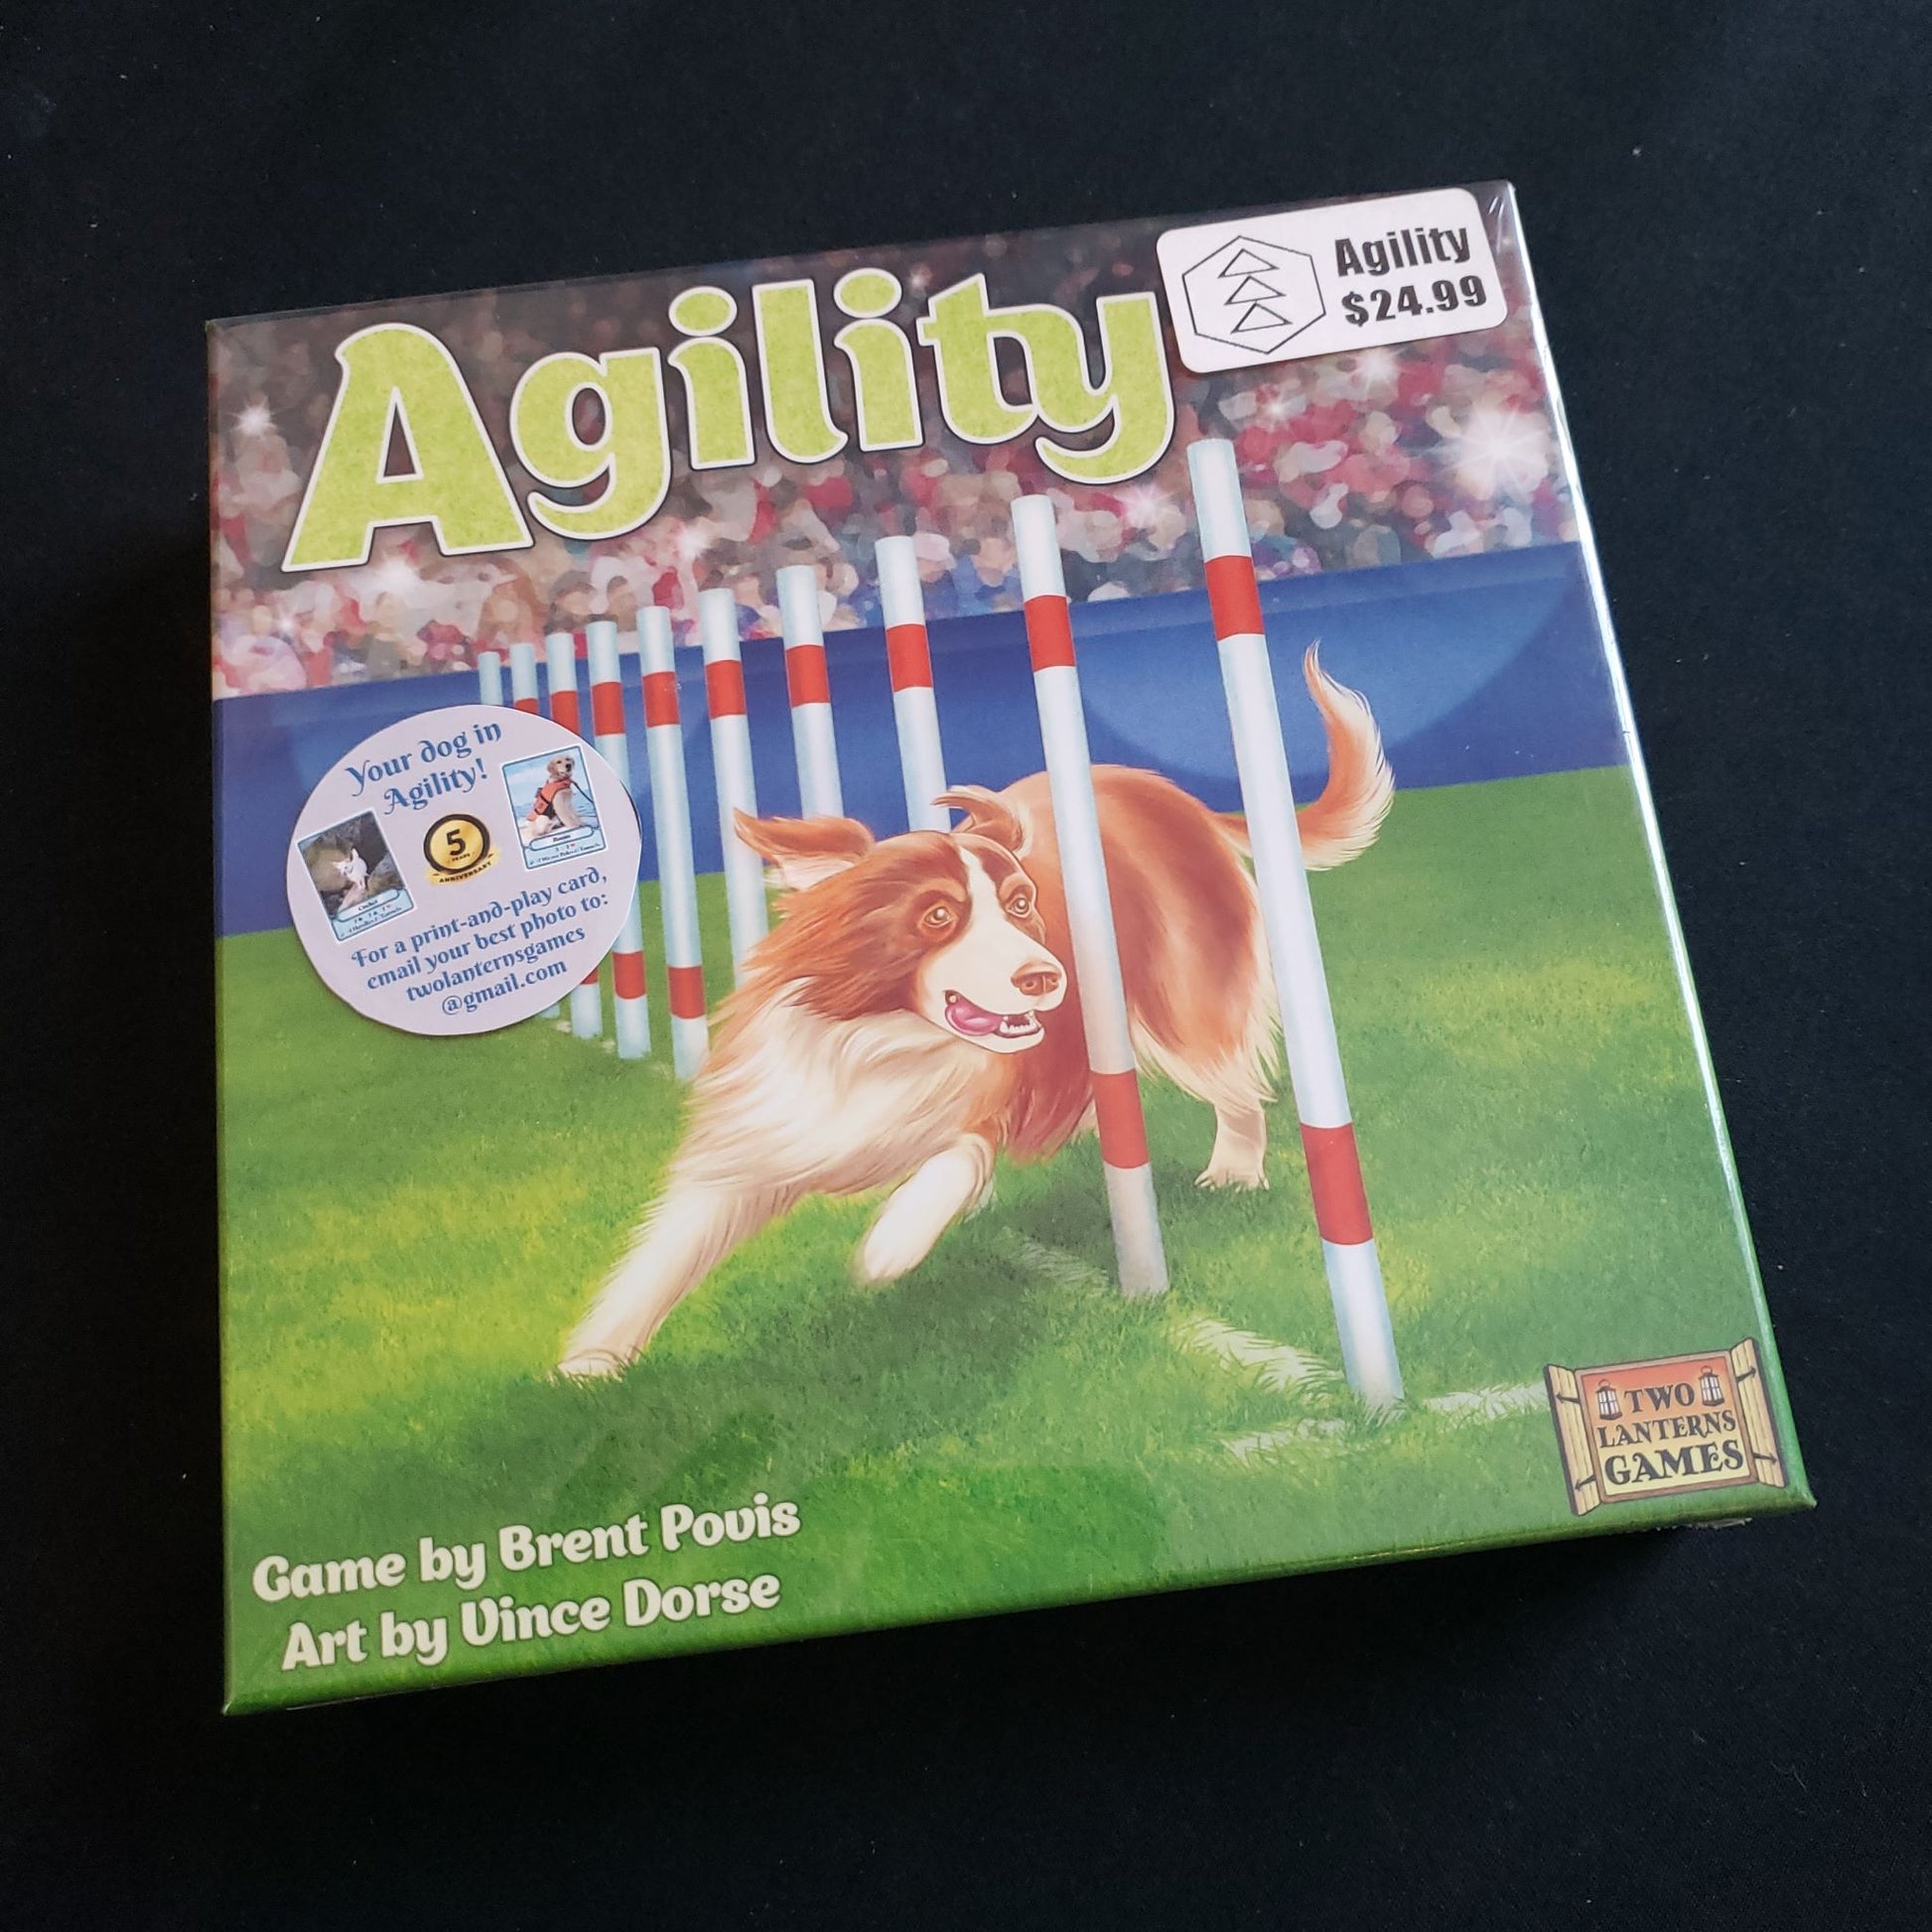 Agility board game - front cover of box